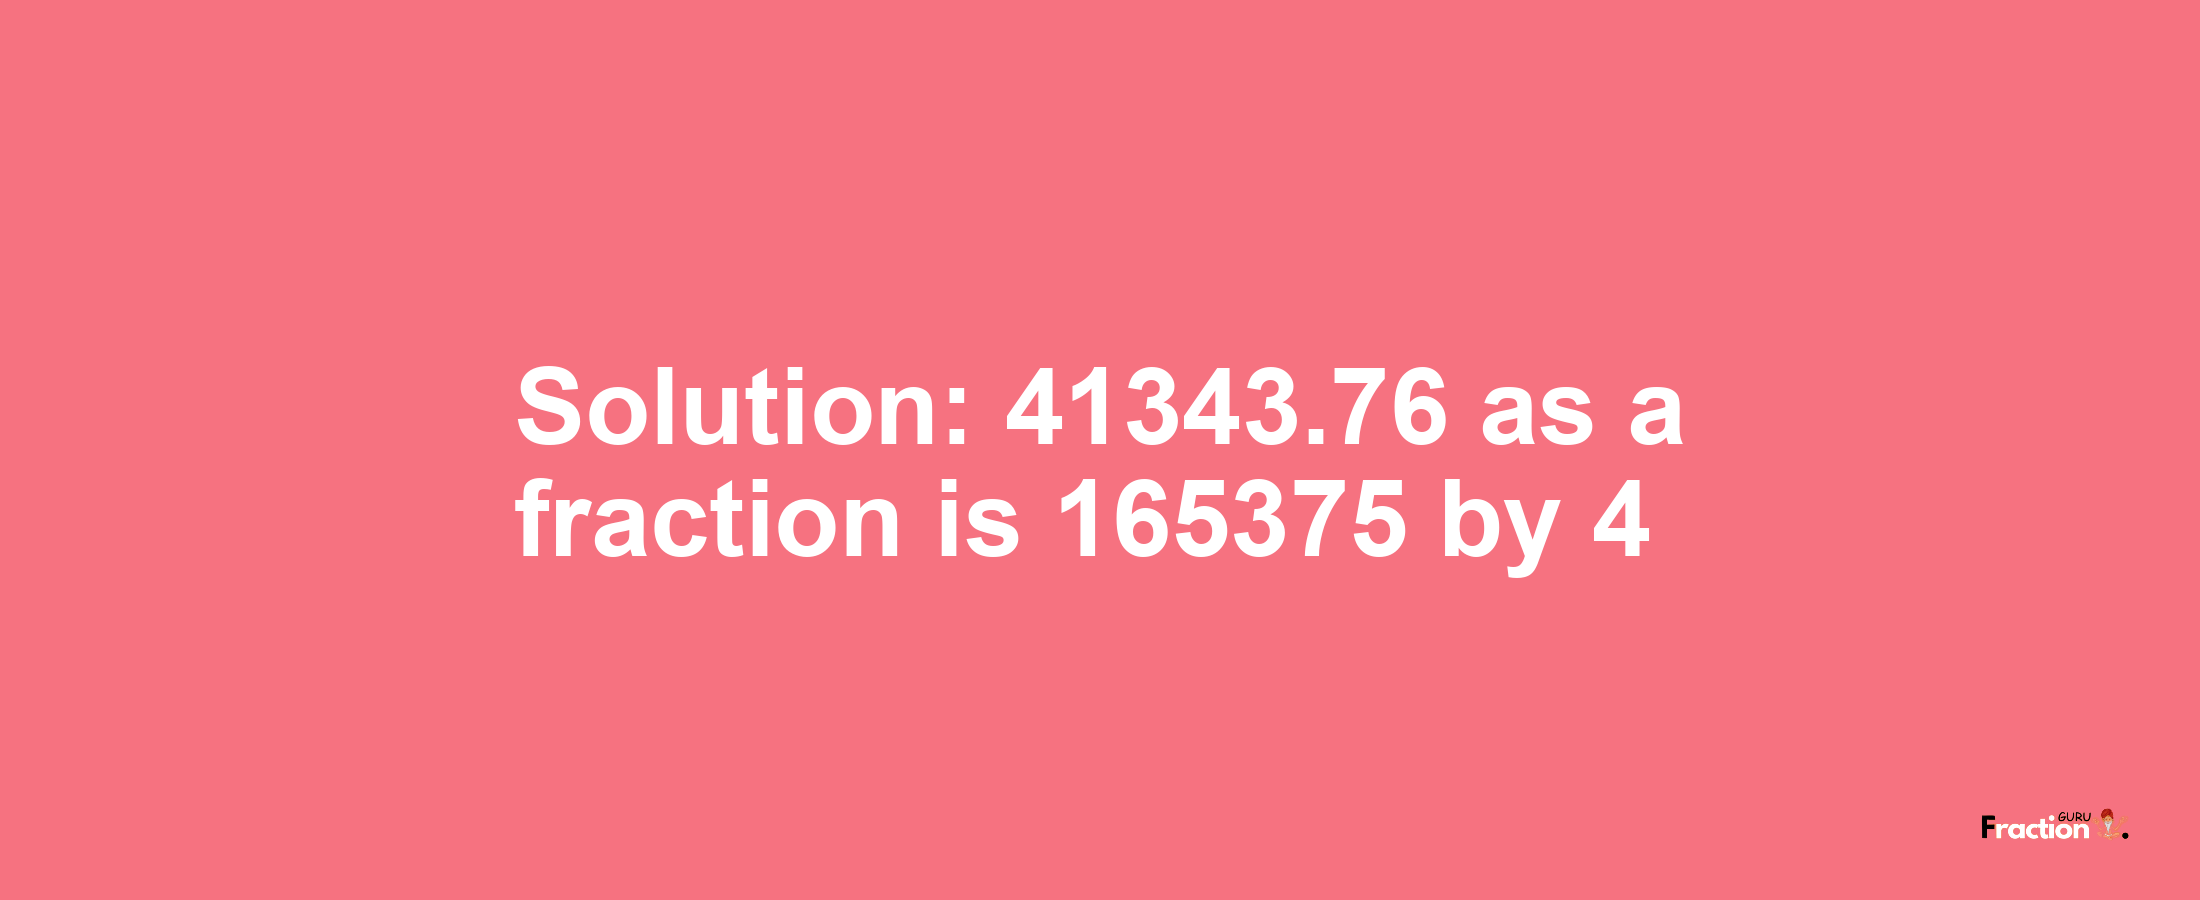 Solution:41343.76 as a fraction is 165375/4